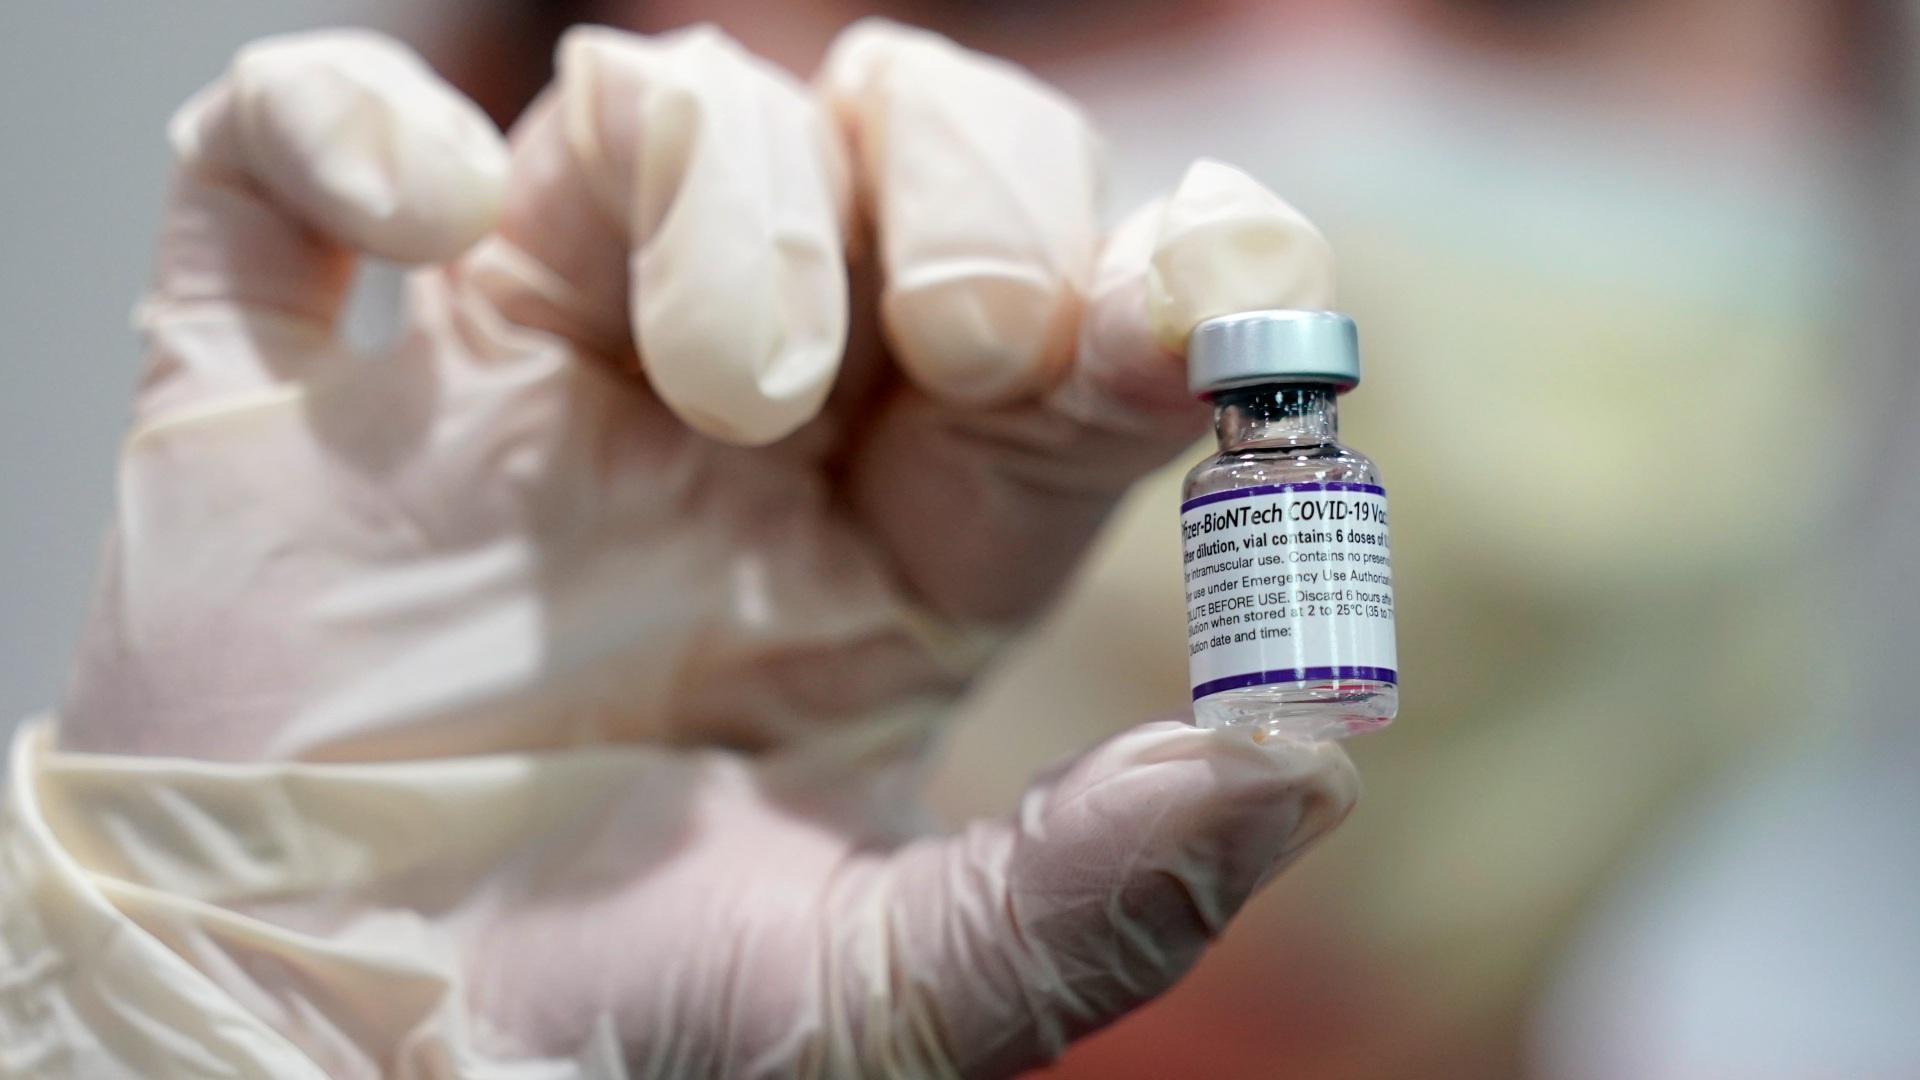 A health care worker holds a vial of the Pfizer COVID-19 vaccine at Jackson Memorial Hospital in Miami, in this Tuesday, Oct. 5, 2021, file photo. (AP Photo / Lynne Sladky, File)